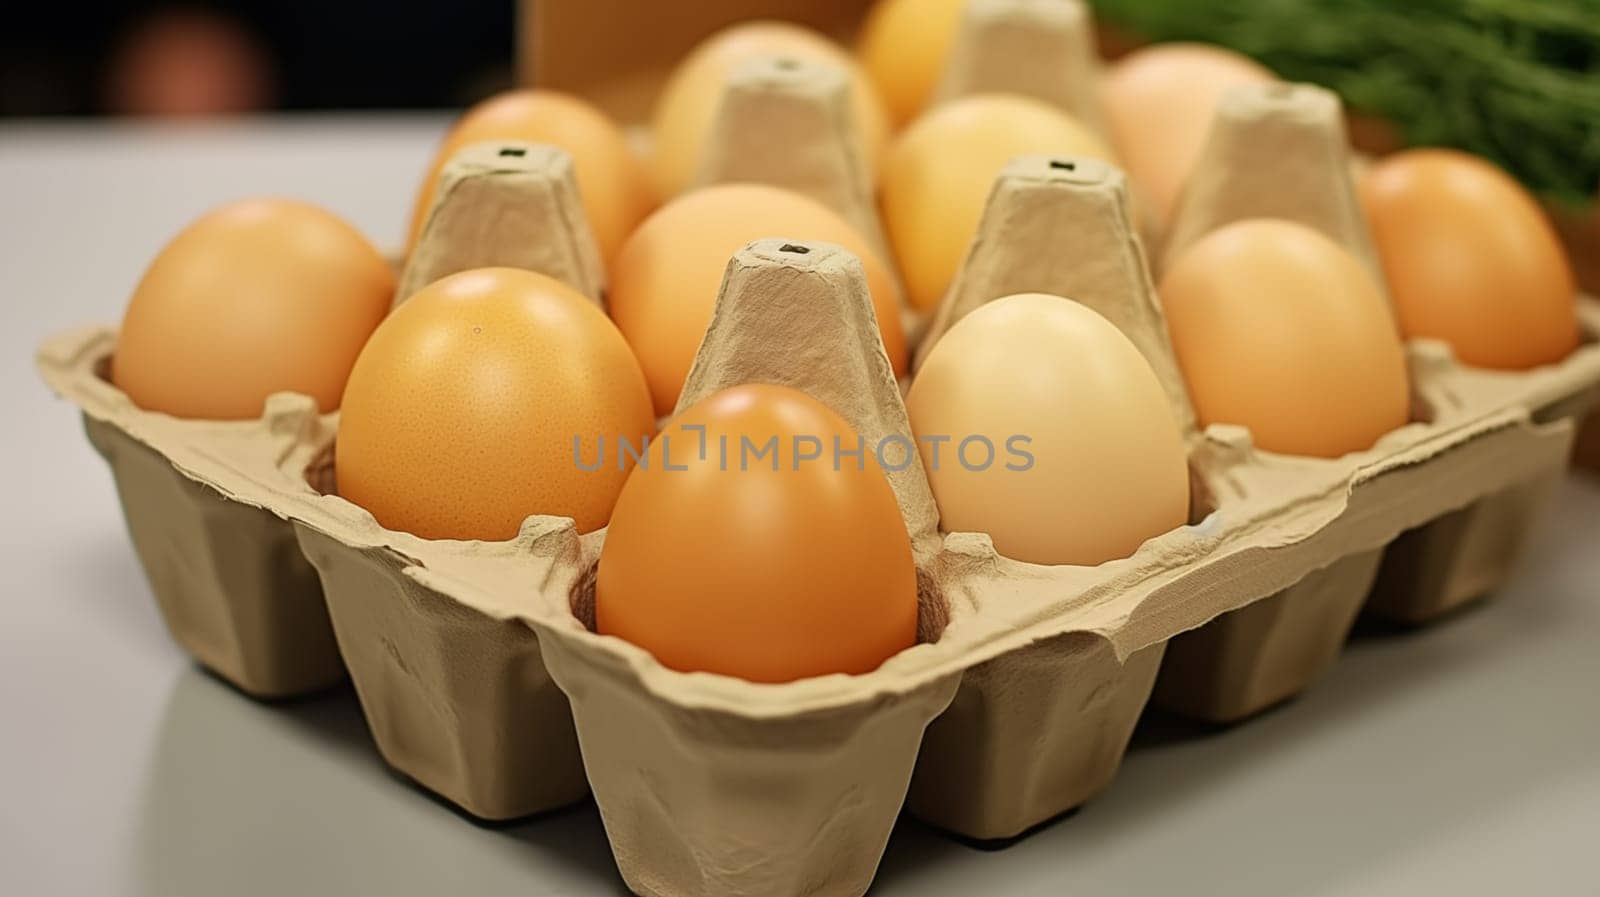 A dozen gold-colored eggs lie in a cardboard package on the table. Close up